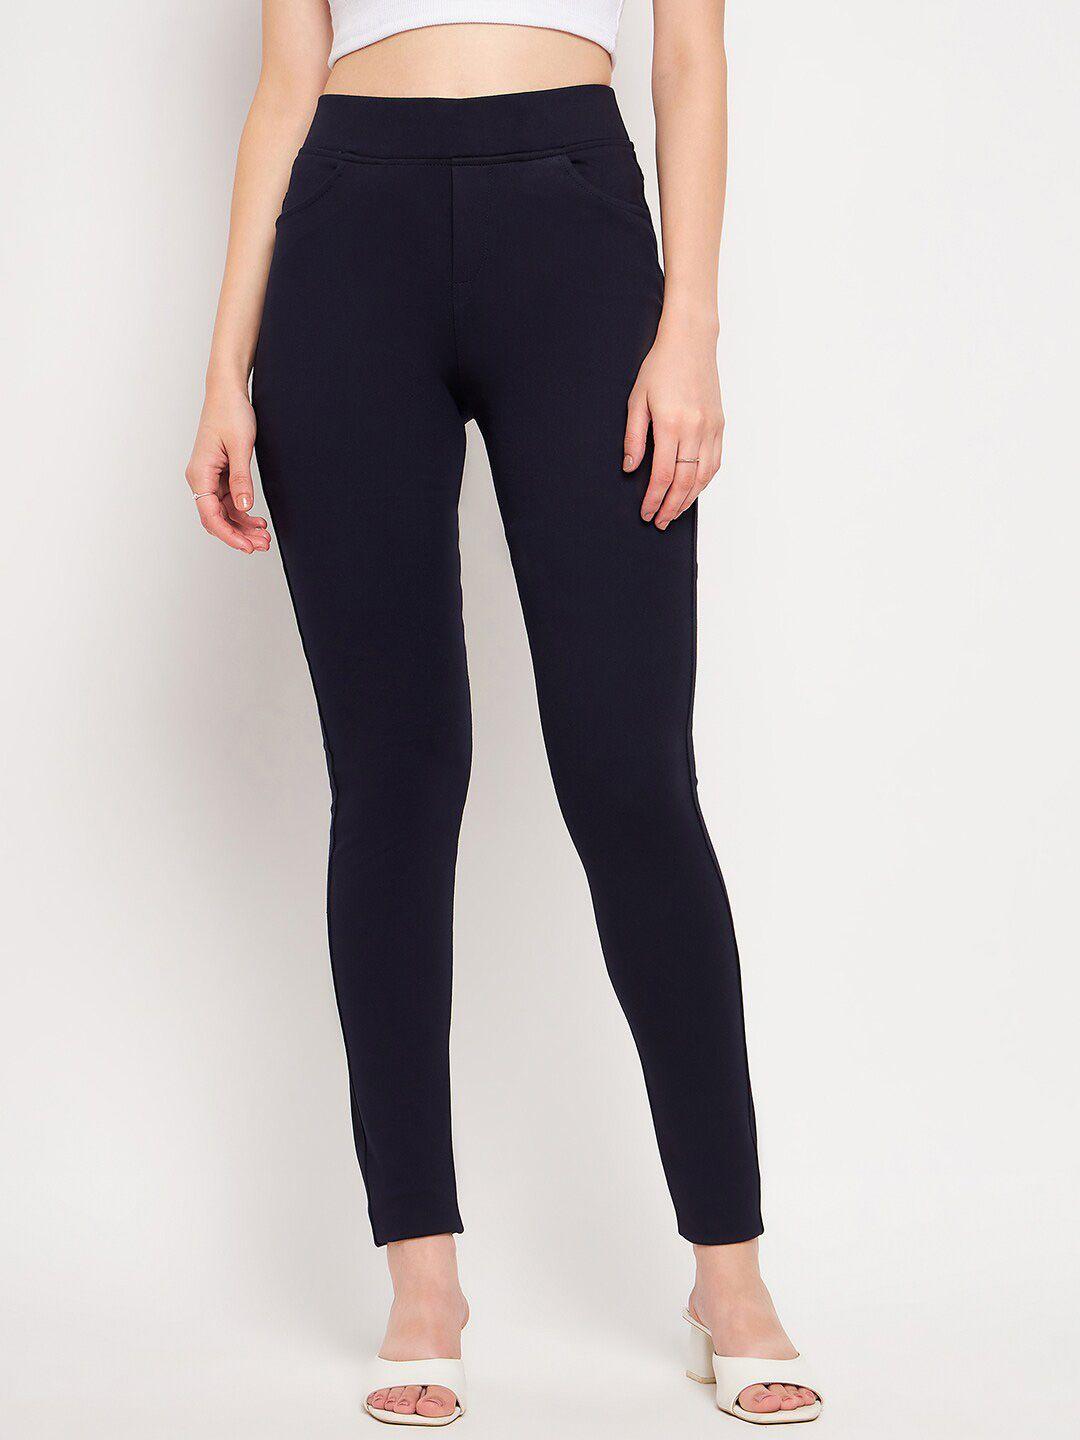 tulip-21-women-ankle-length-slim-fit-stretchable-jeggings